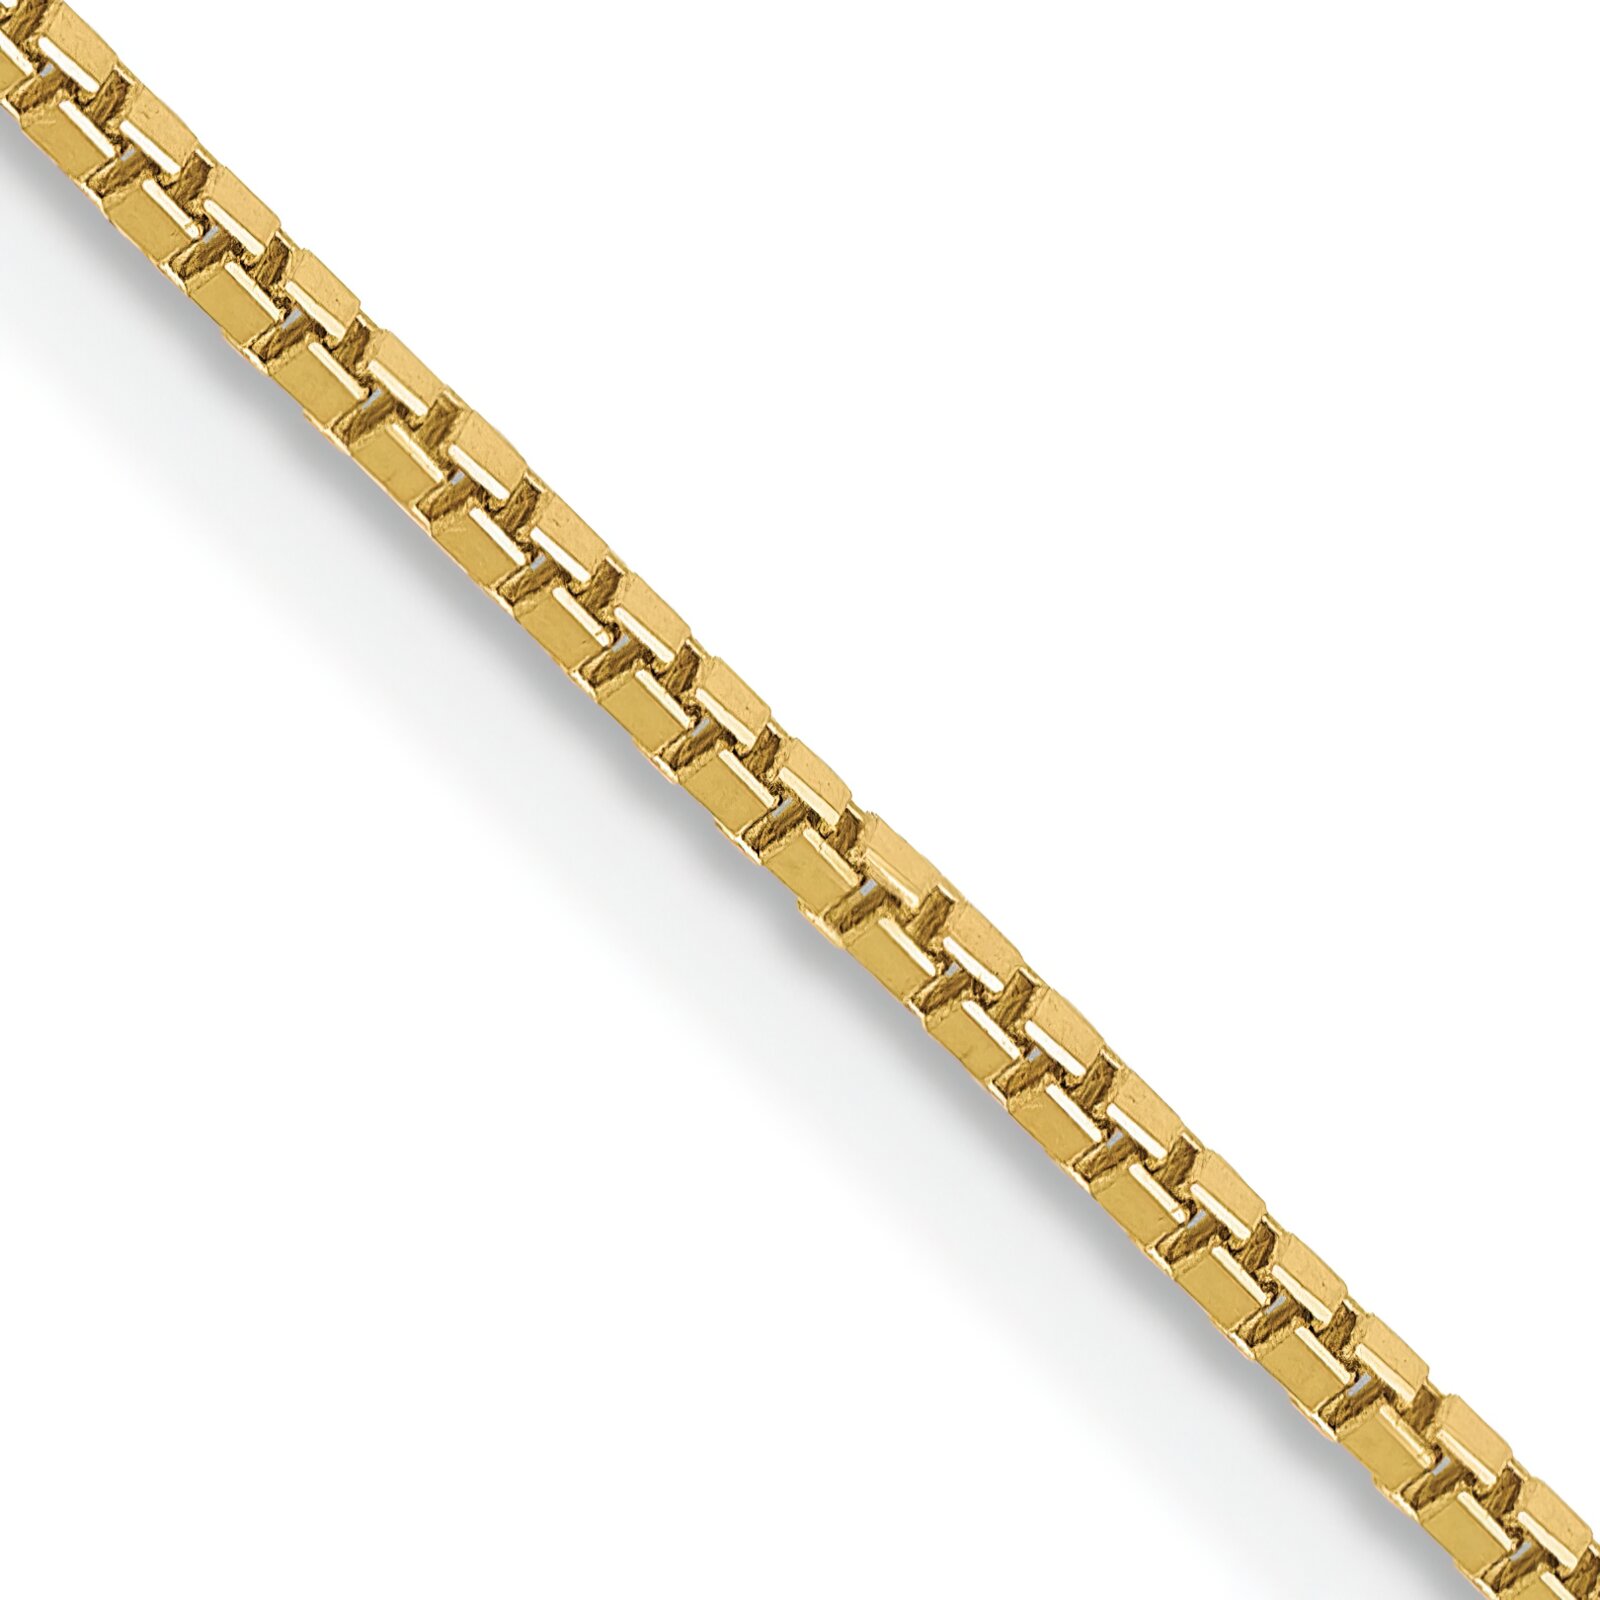 Findingking 10K Yellow Gold 1mm Box Chain Necklace Jewelry 30"